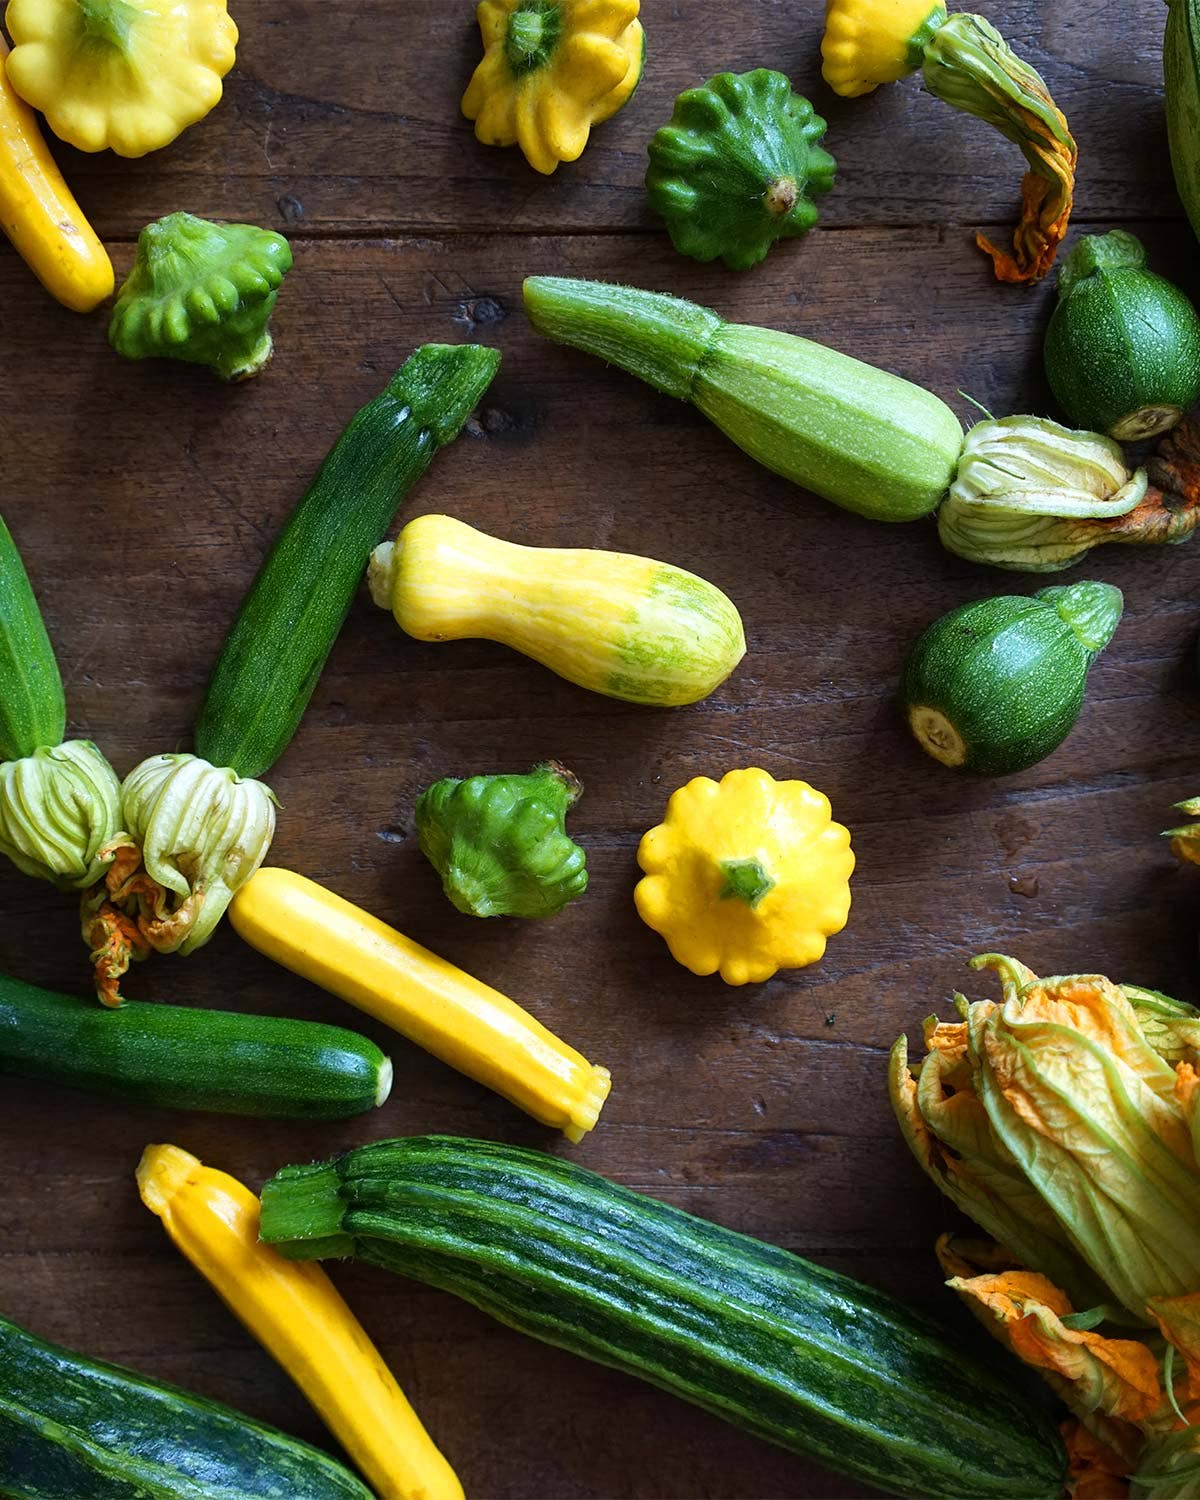 How to Buy, Store, and Cook Summer Squash, the Season’s Most Prolific Piece of Produce